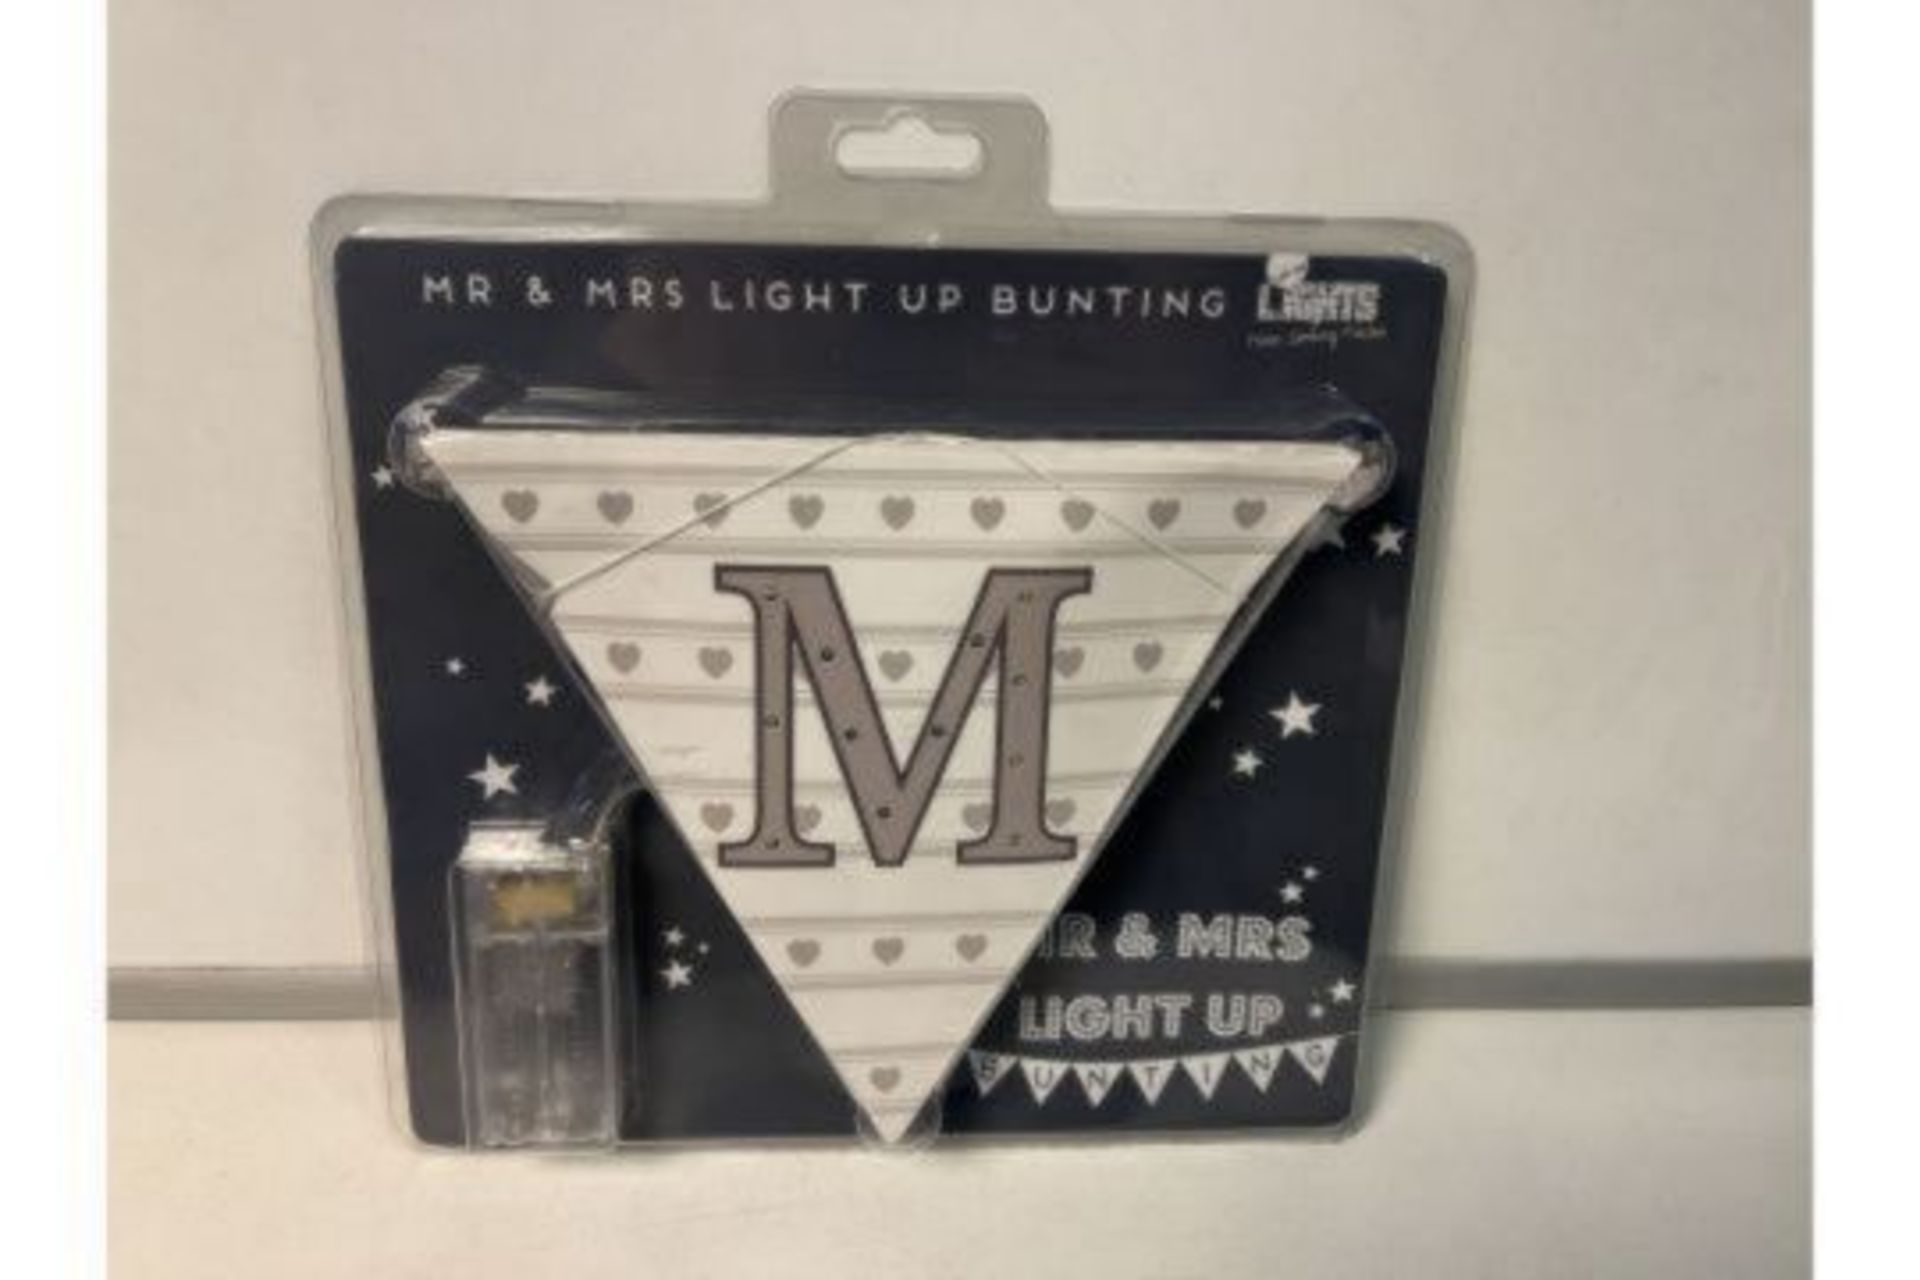 40 X BRAND NEW MR AND MRS LIGHT UP BUNTINGS RRP £18 EACH S1RA